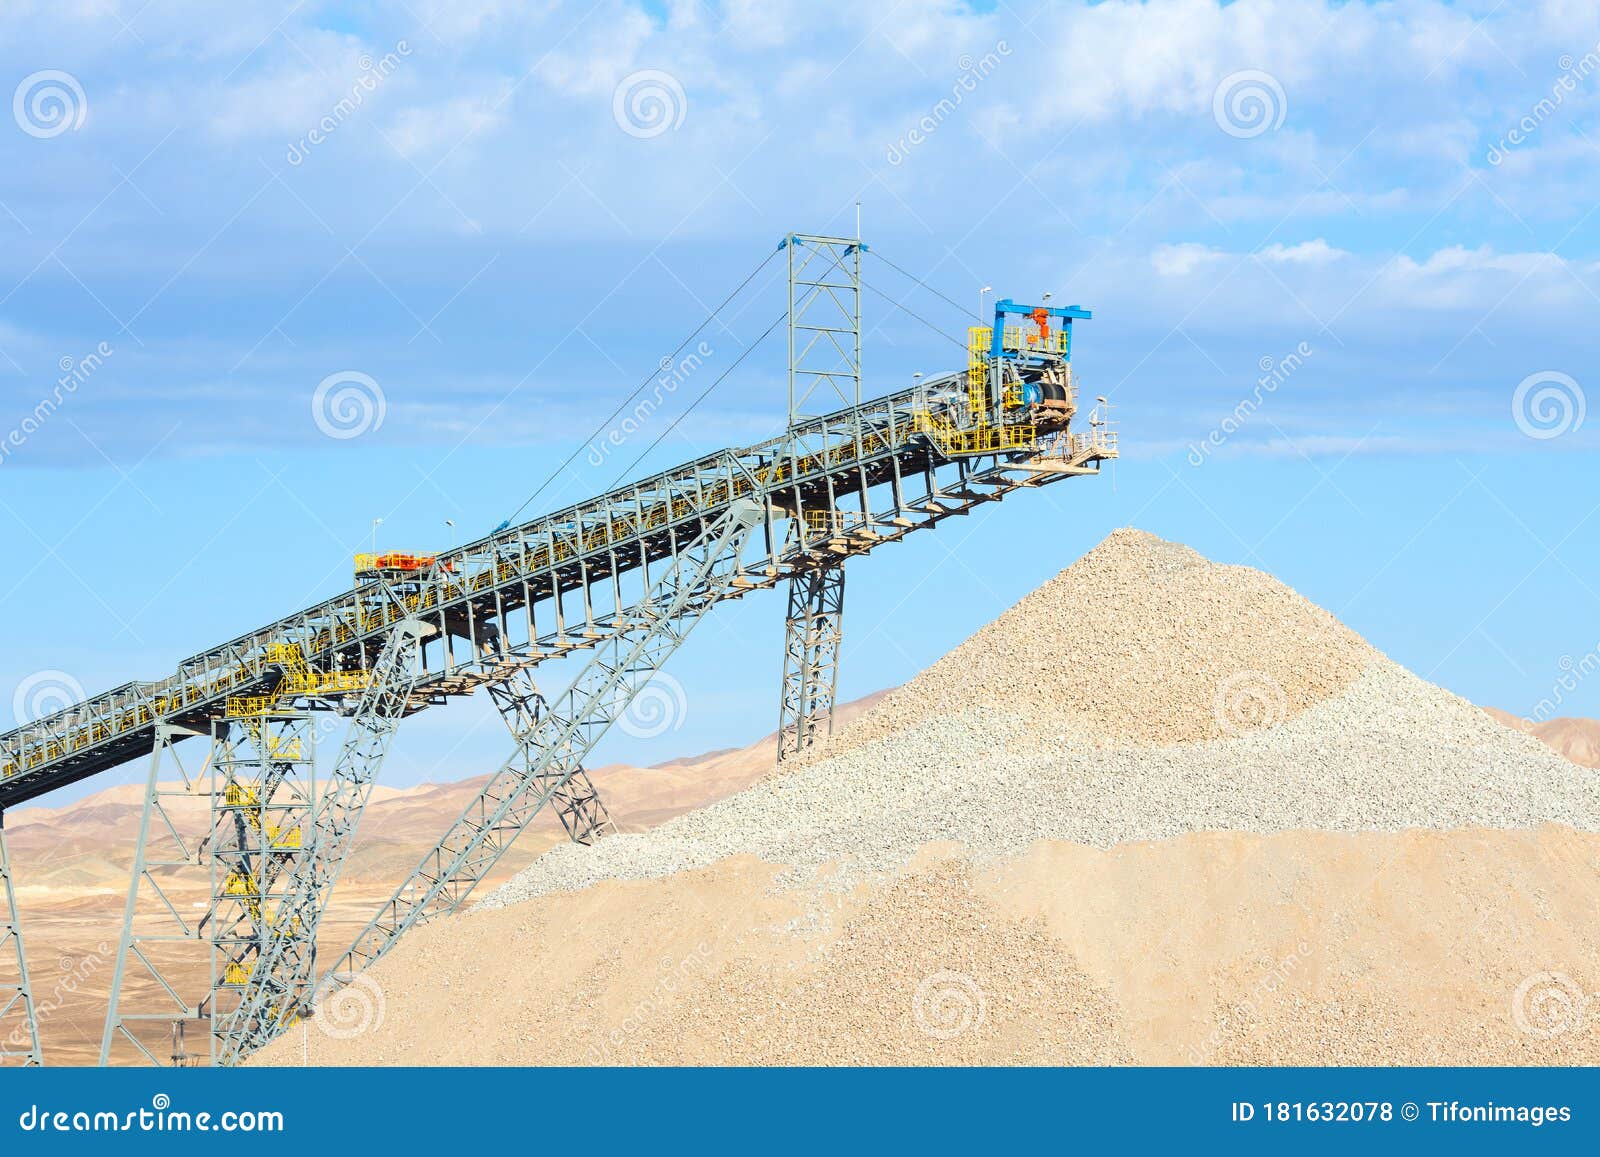 stockpile and conveyor belt in a copper mine